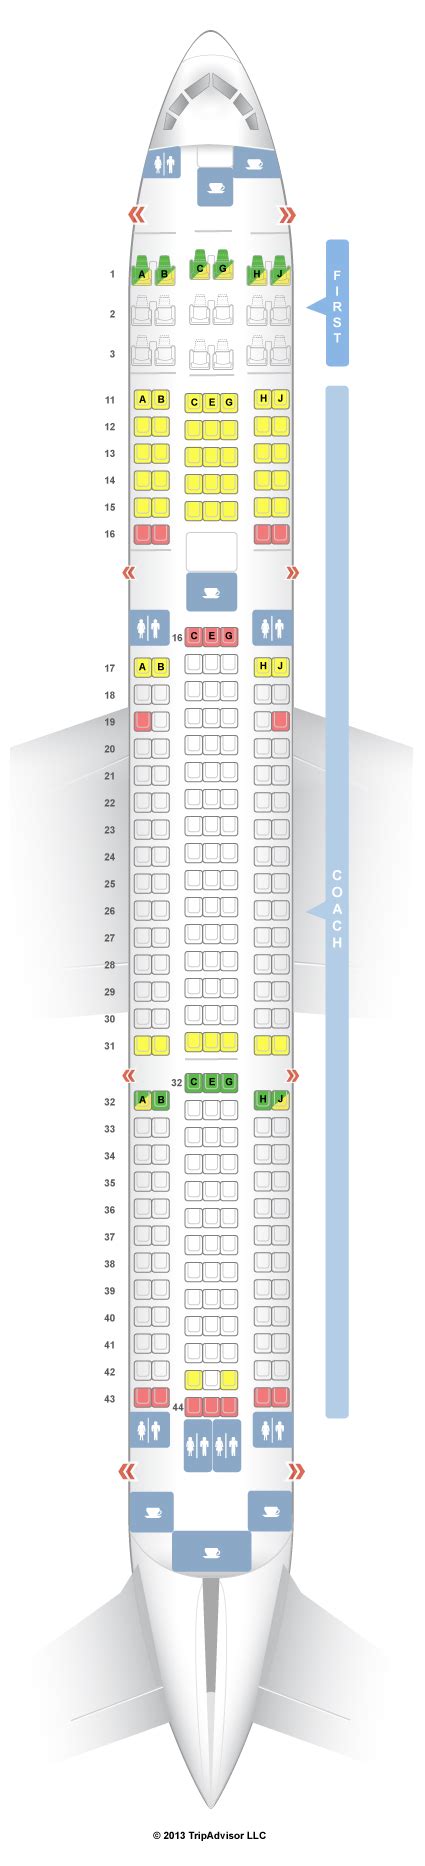 American Airlines Seat Maps. Overview. Planes & Seat Maps. Airbus A319 (319) Airbus A320 (320) Airbus A321 (321) Layout 1. Airbus A321 (321) Layout 2. Airbus A321 (32B) Layout 3. Airbus A321neo ACF.. 